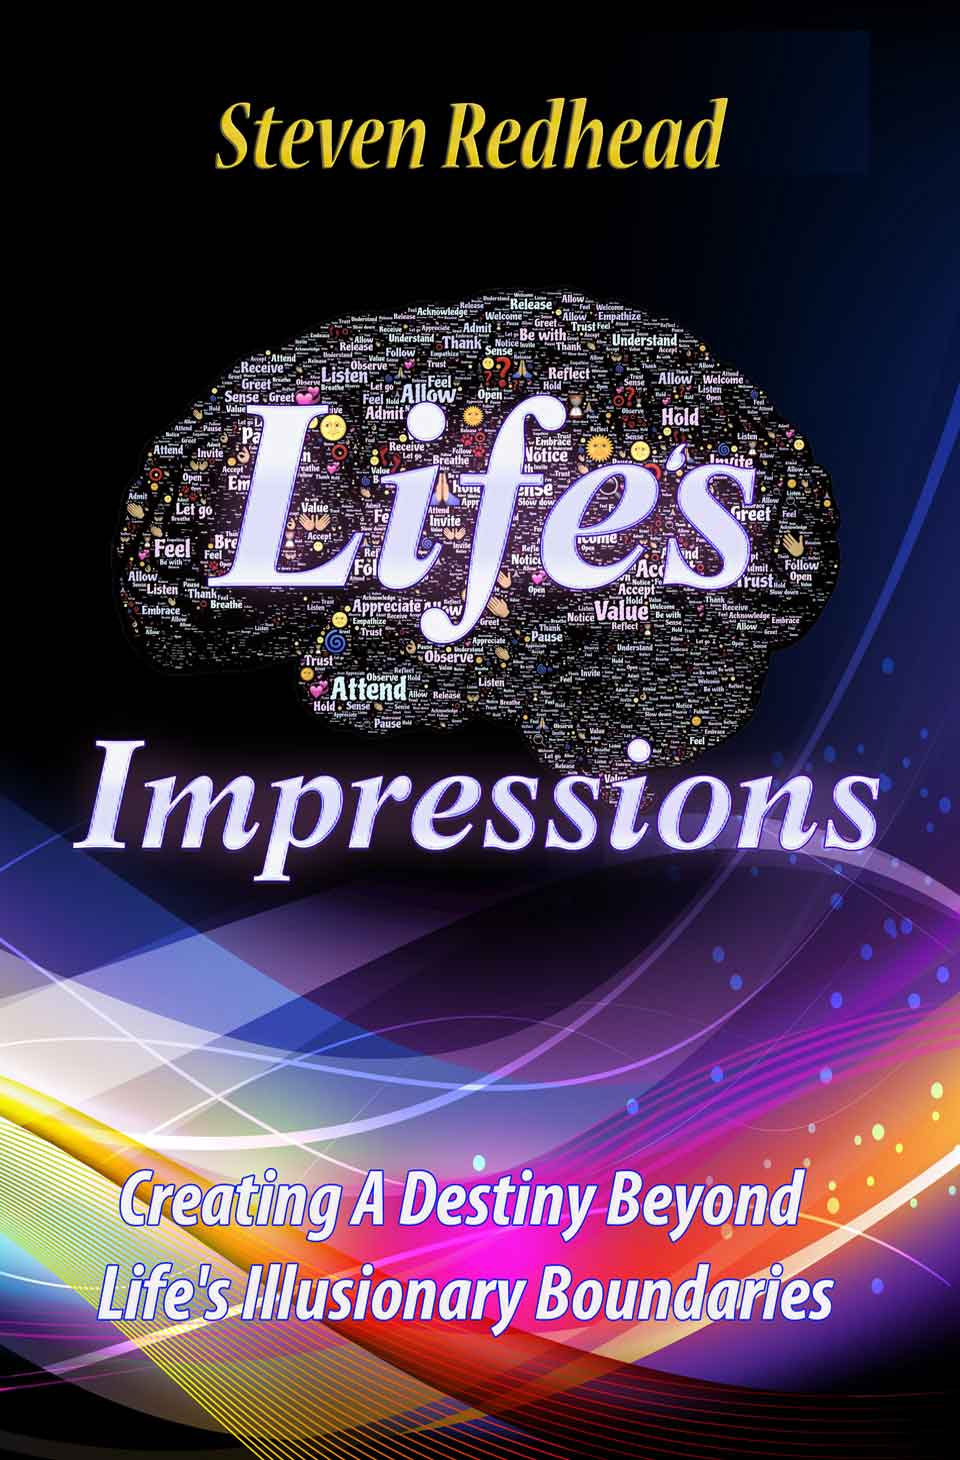 Life'sImpressions book by Steven Redhead